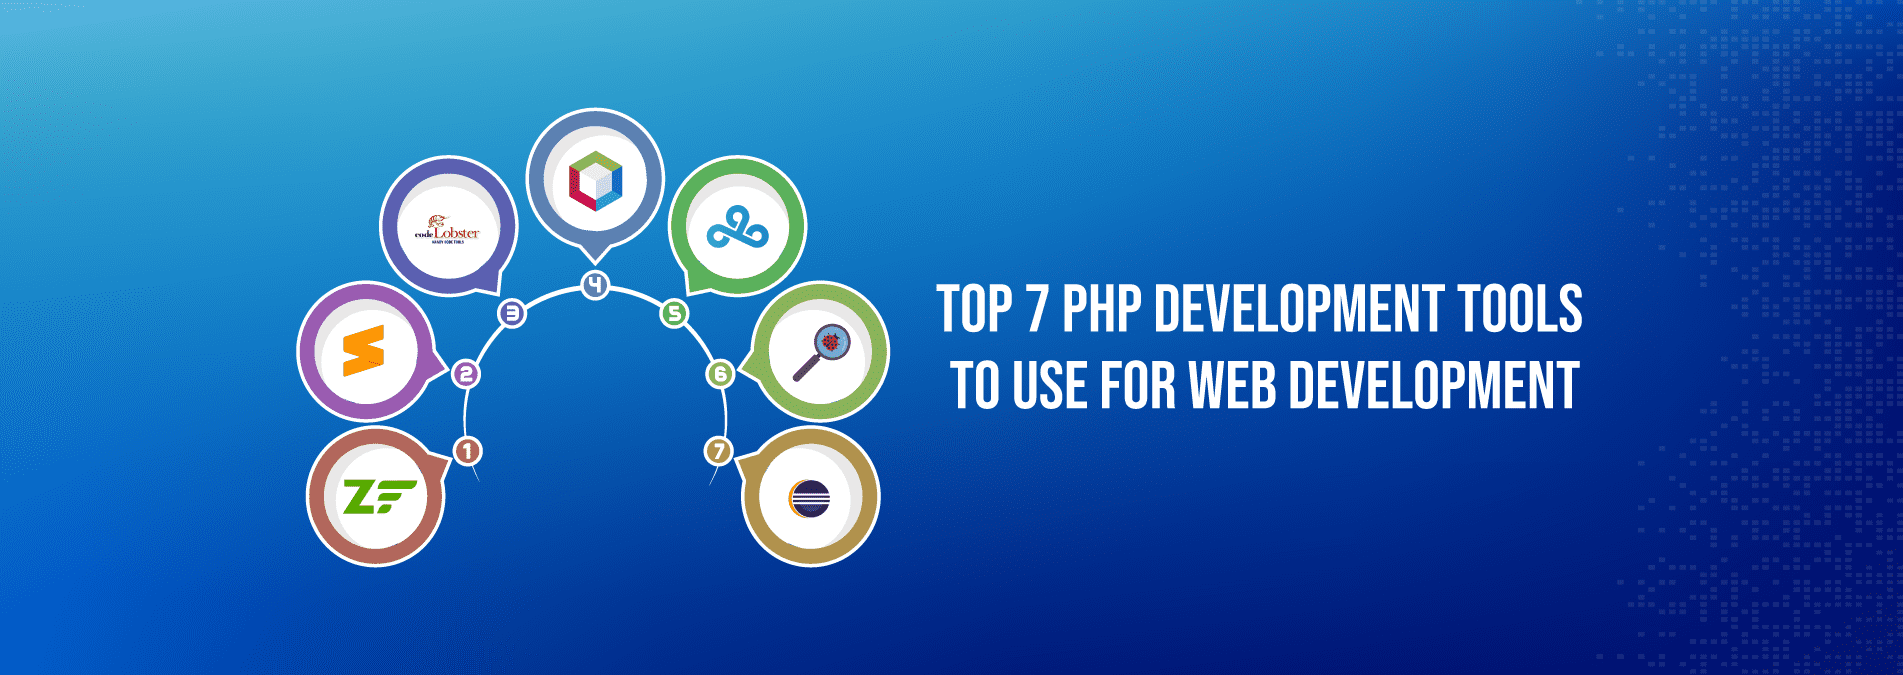 Top 7 PHP Development Tools To Use For Web Development - Internet Soft